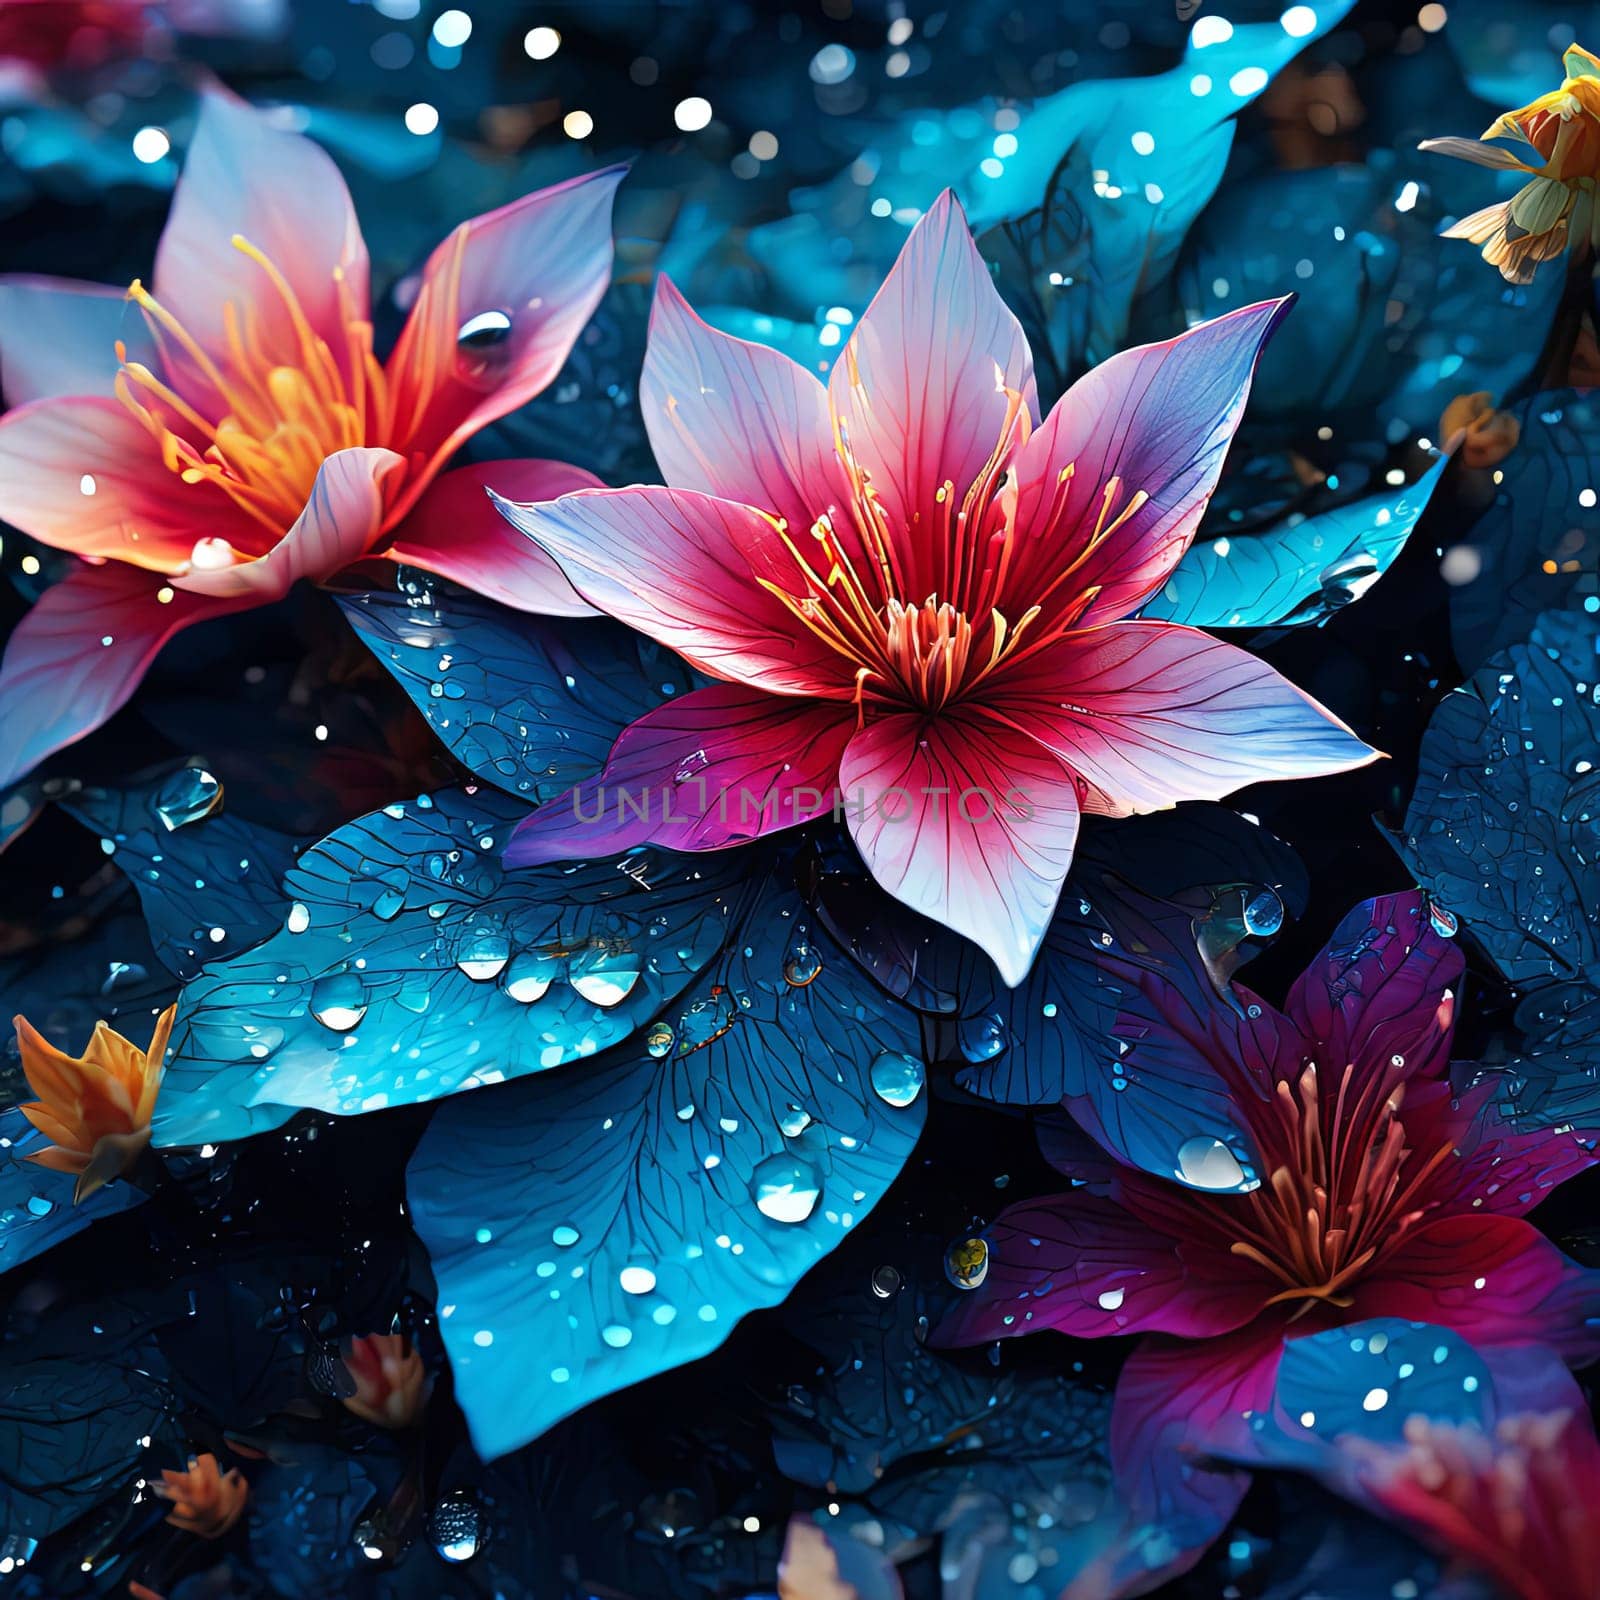 Colorful flowers adorned with glistening water droplets. Shimmering droplets create visually striking, captivating composition. For interior design, textile, clothing, gift wrapping, web design, print